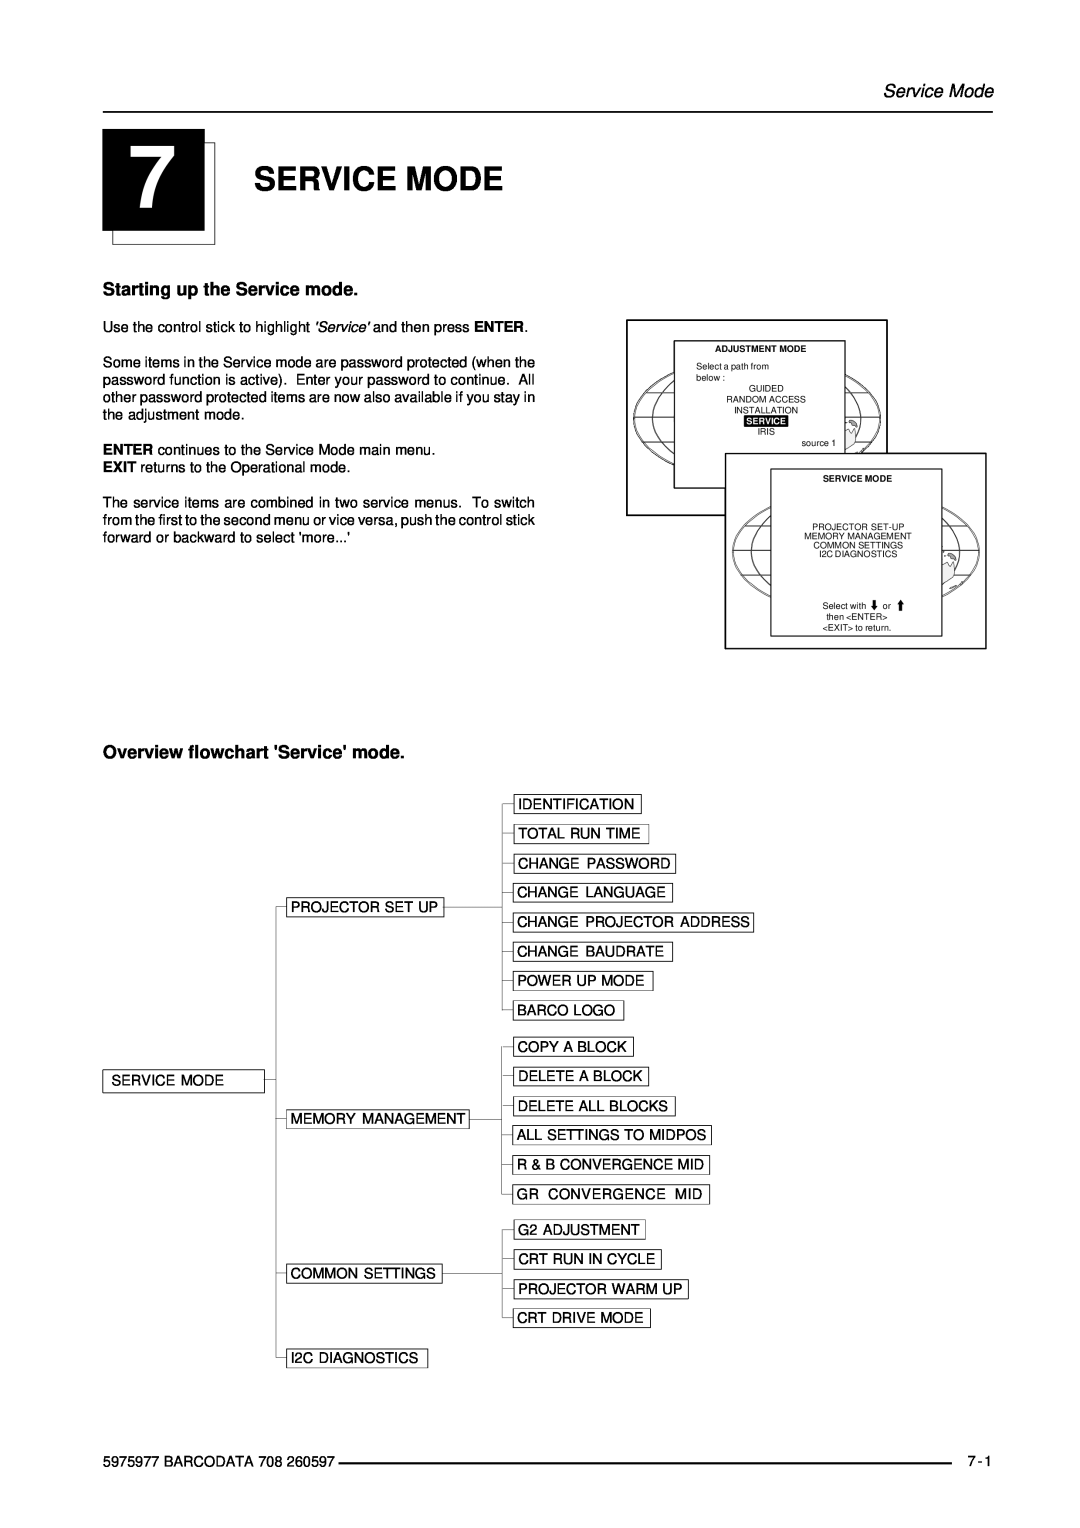 Barco R9002120 manual Service Mode, Starting up the Service mode, Overview flowchart Service mode 